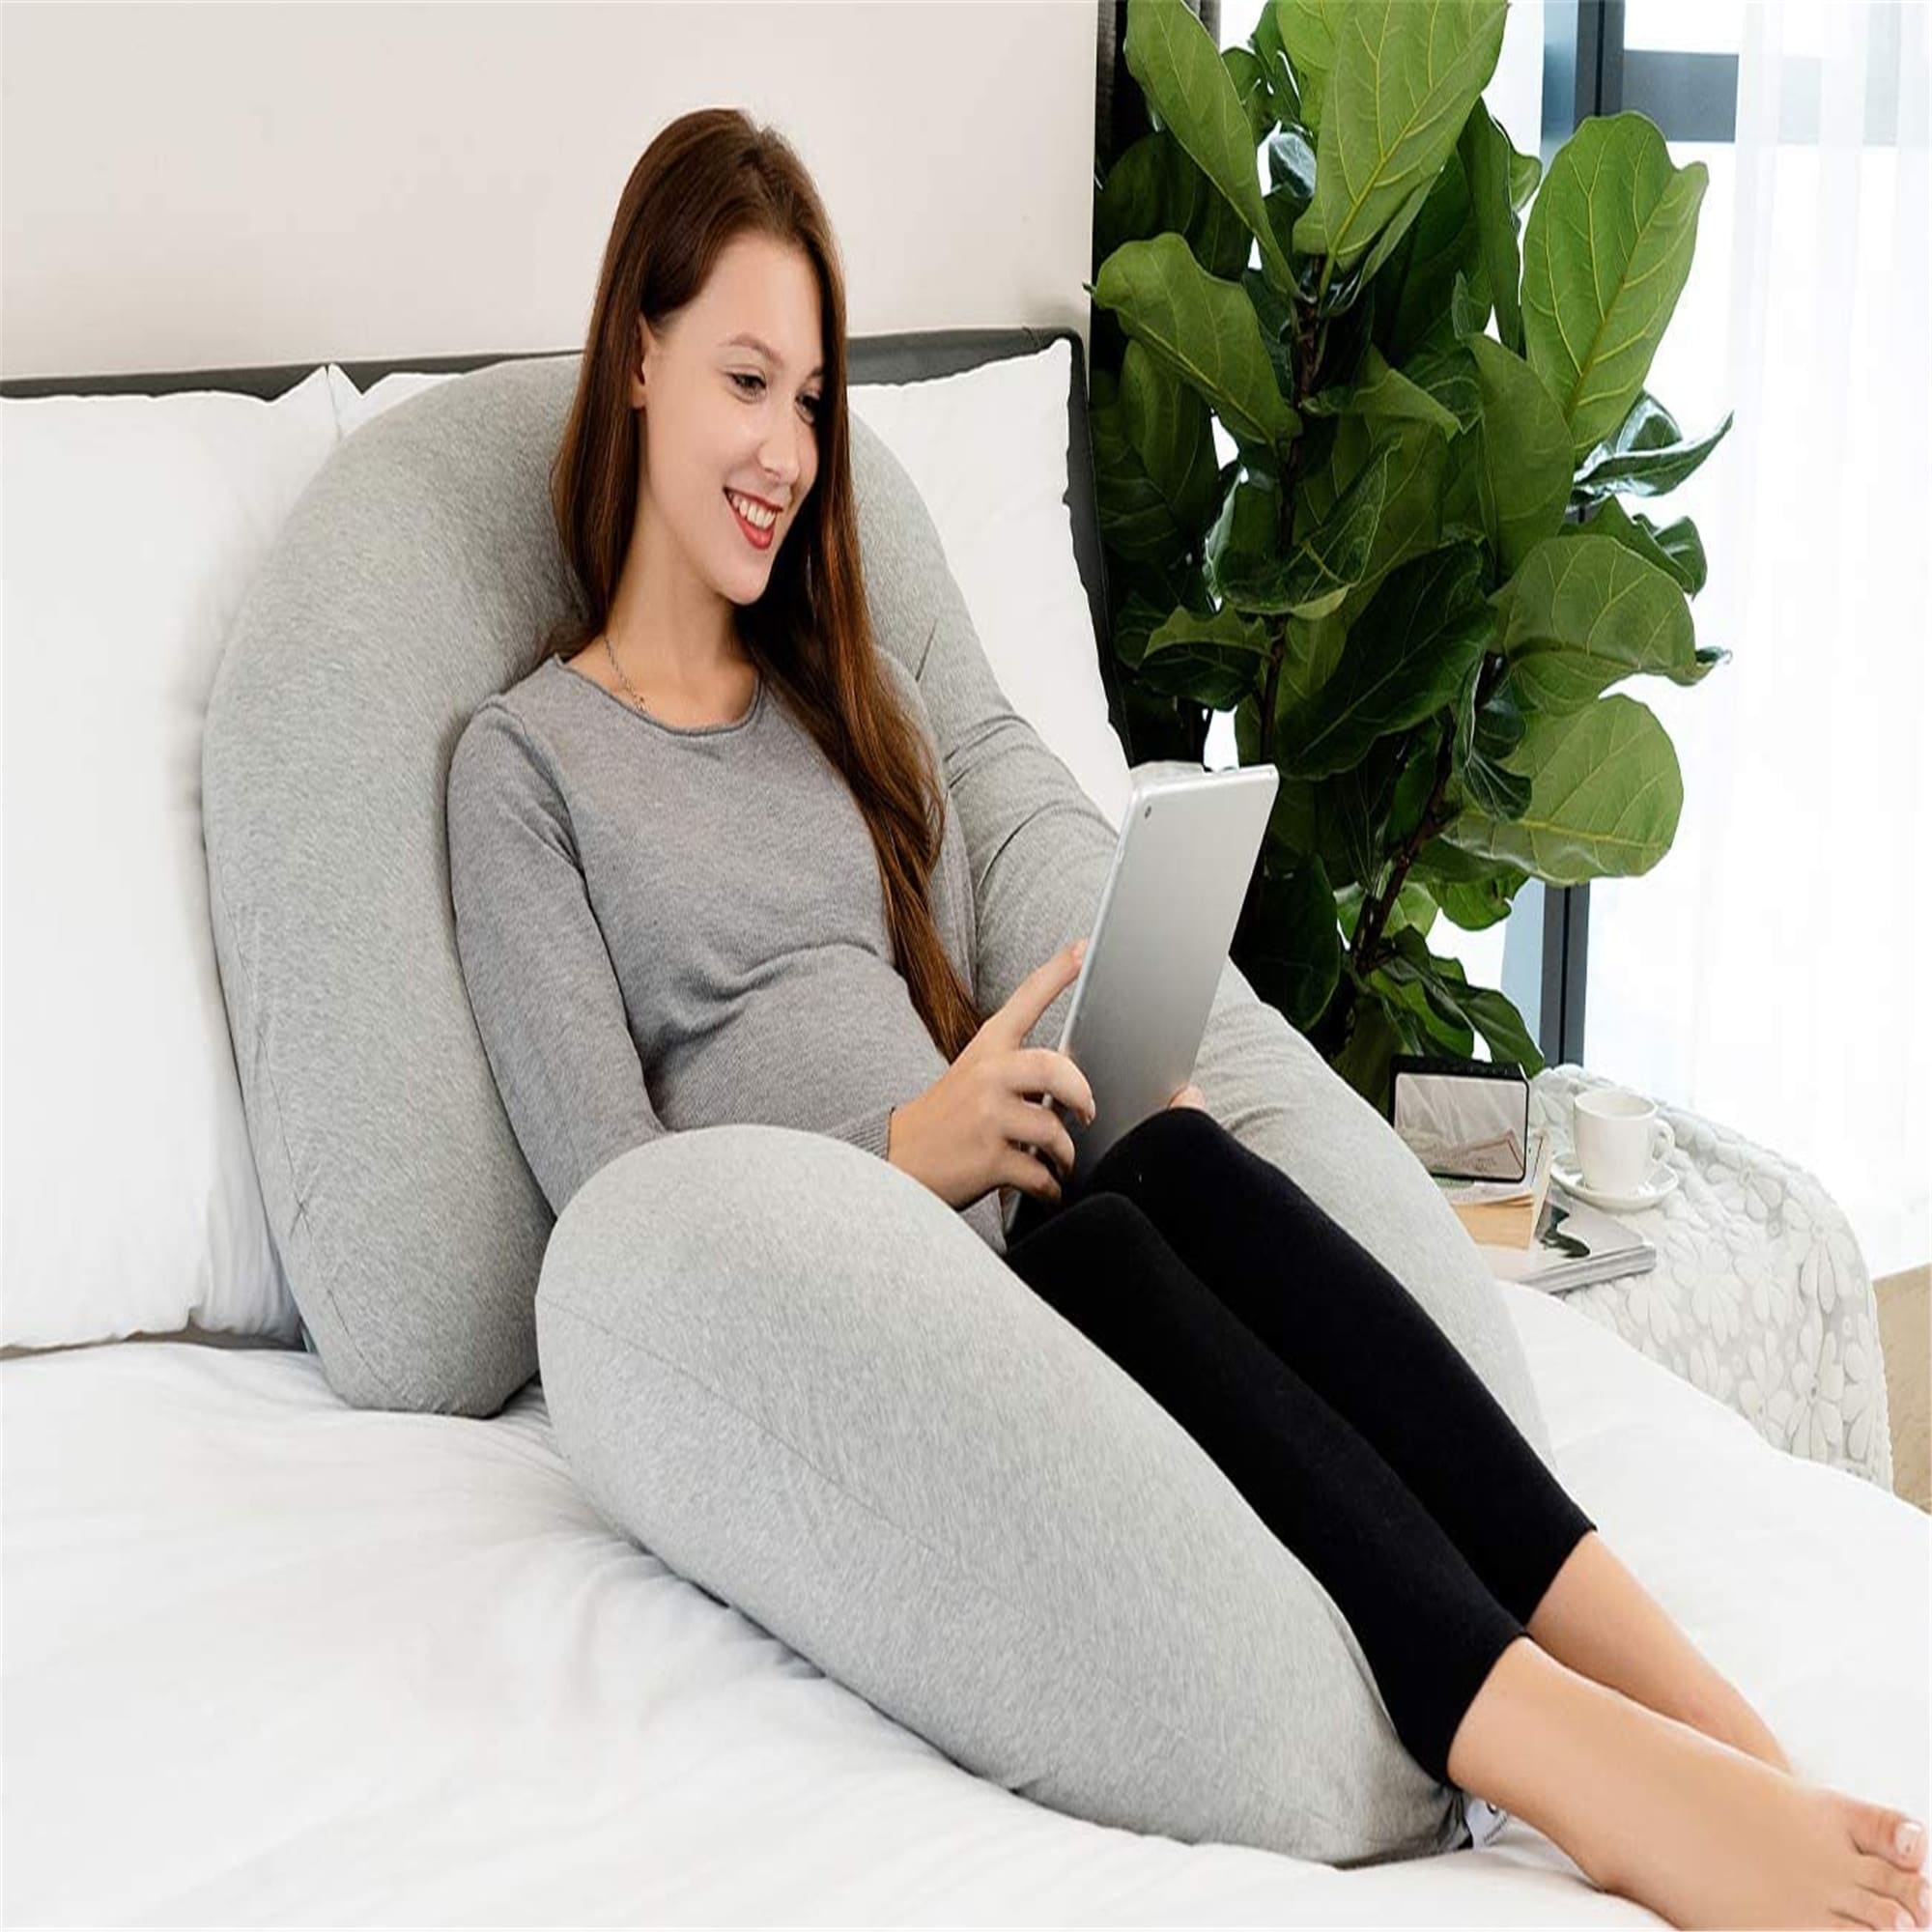 INSEN Pregnancy Body Pillow with Jersey Cover,C Shaped Full Body Pillow for Preg 